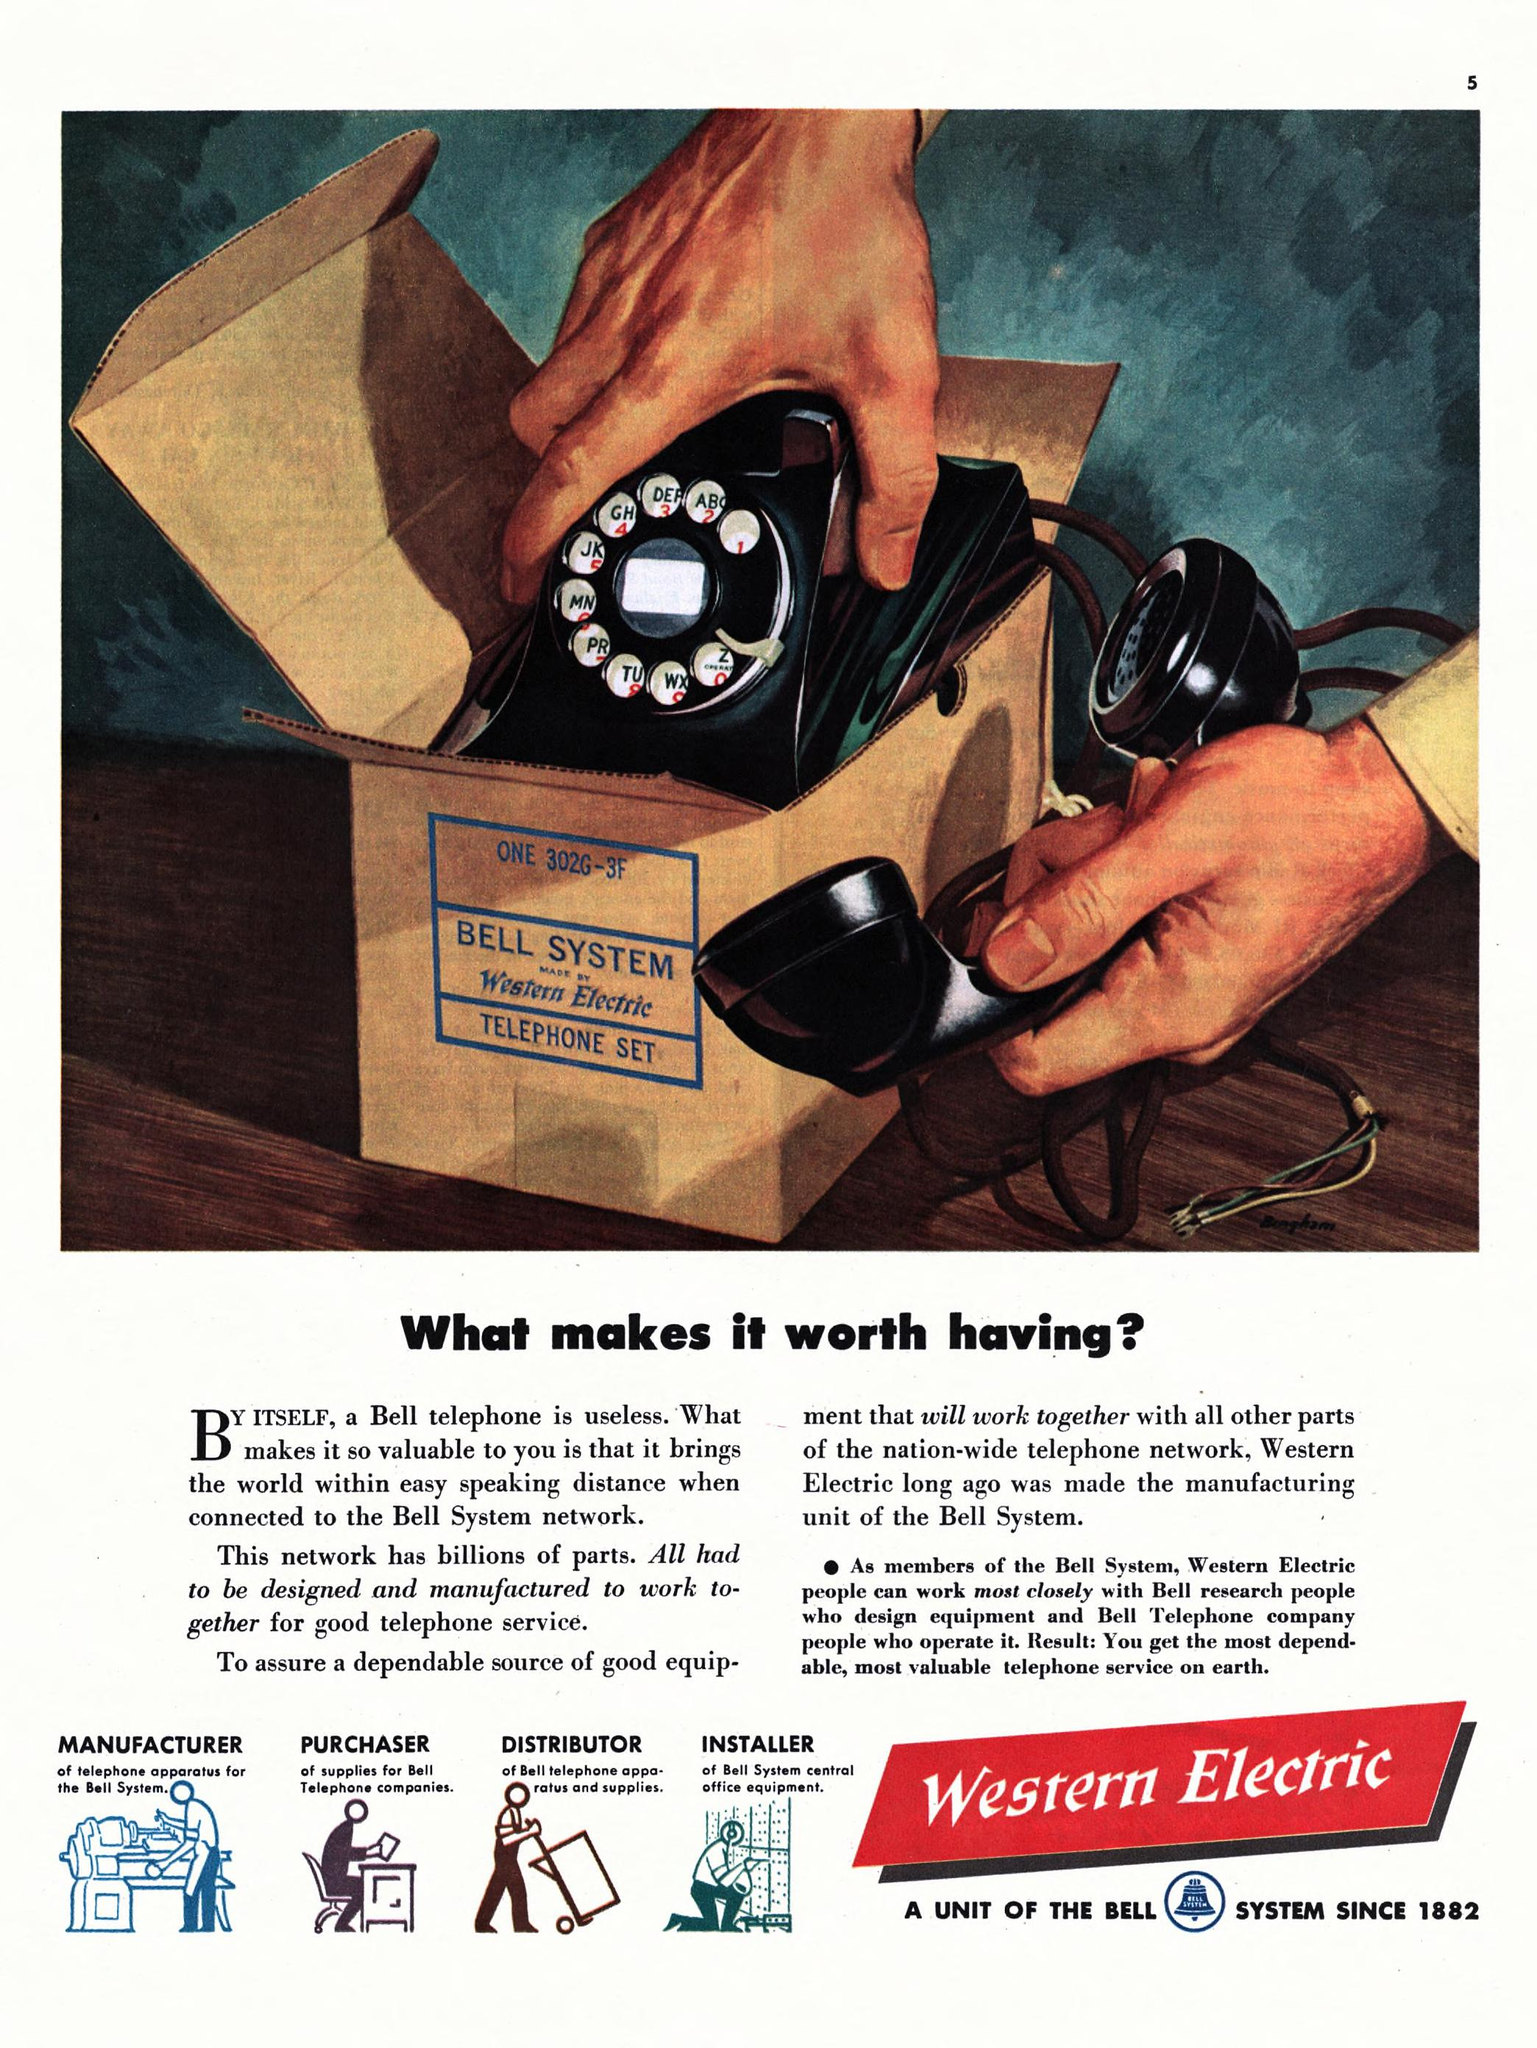 Western Electric - published in Collier's (Vol. 123, No. 11) - March 12, 1949